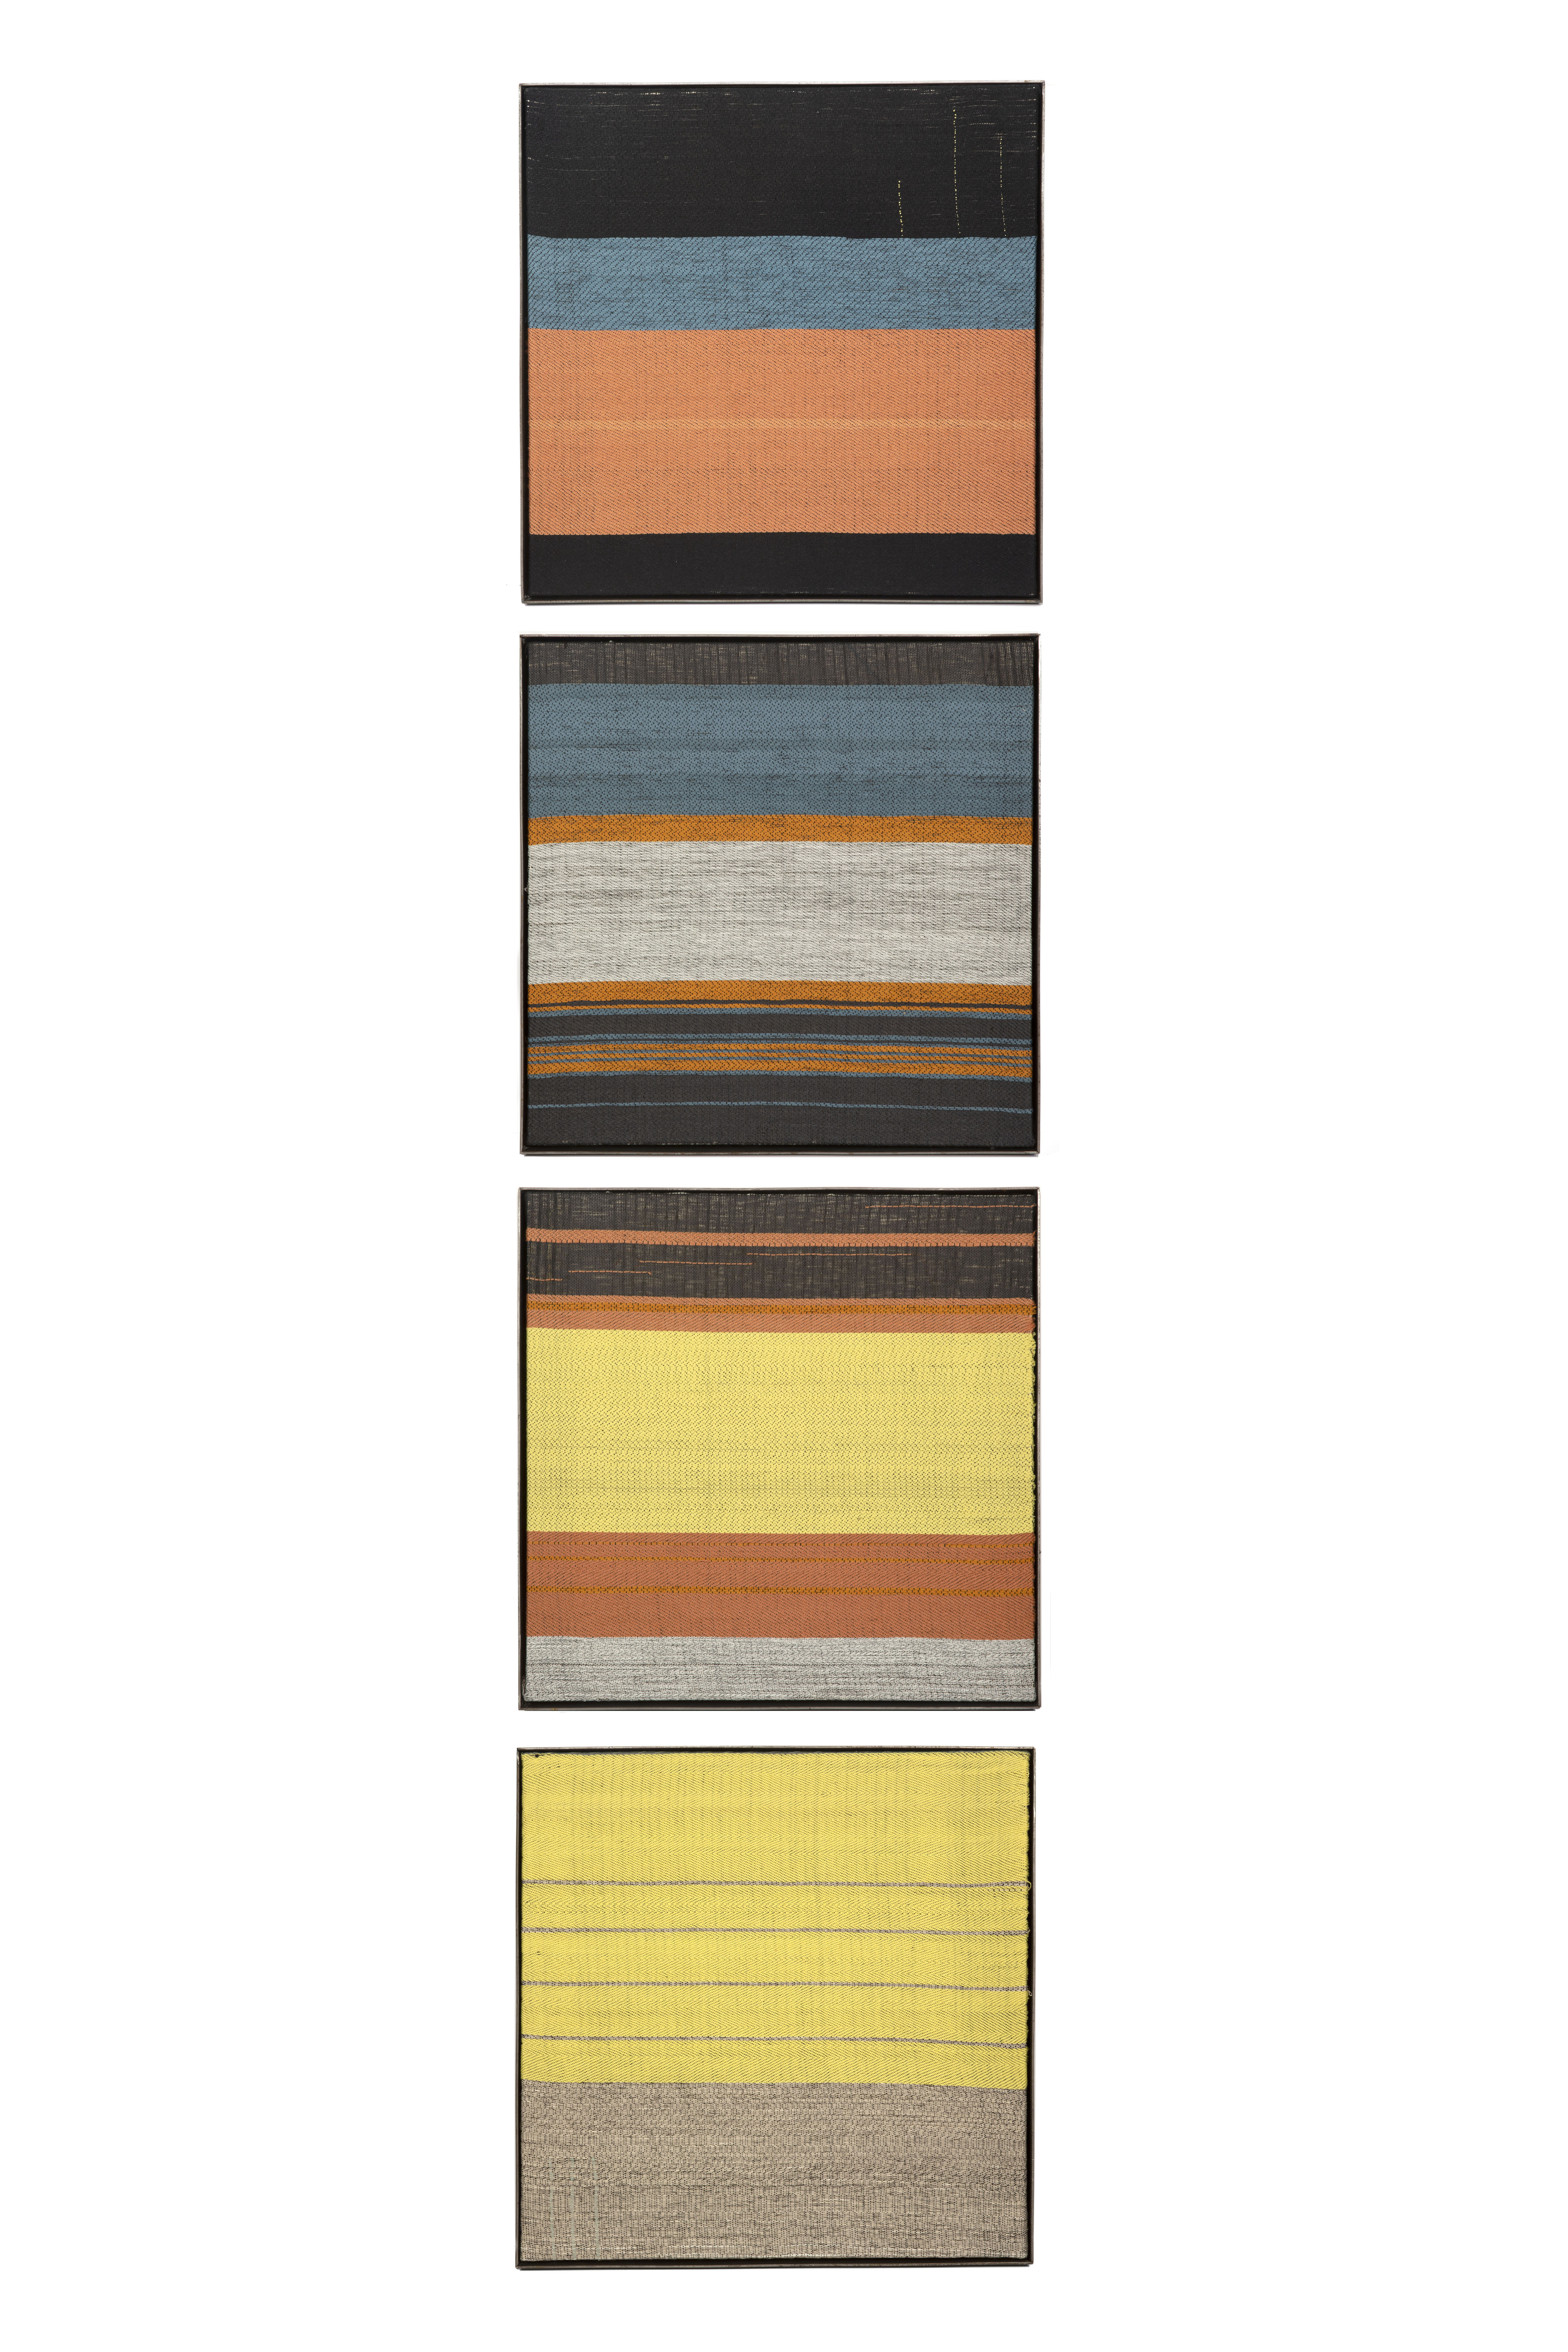 
		                					Elizabeth Hohimer		                																	
																											<i>Shadows at Moonrise (quadriptych),</i>  
																																								2021, 
																																								cotton dyed with collected clay, rayon, indigo, pine paper, silk and ash tapestry set in steel frame, 
																																								24 x 24 x 2 inches 
																								
		                				